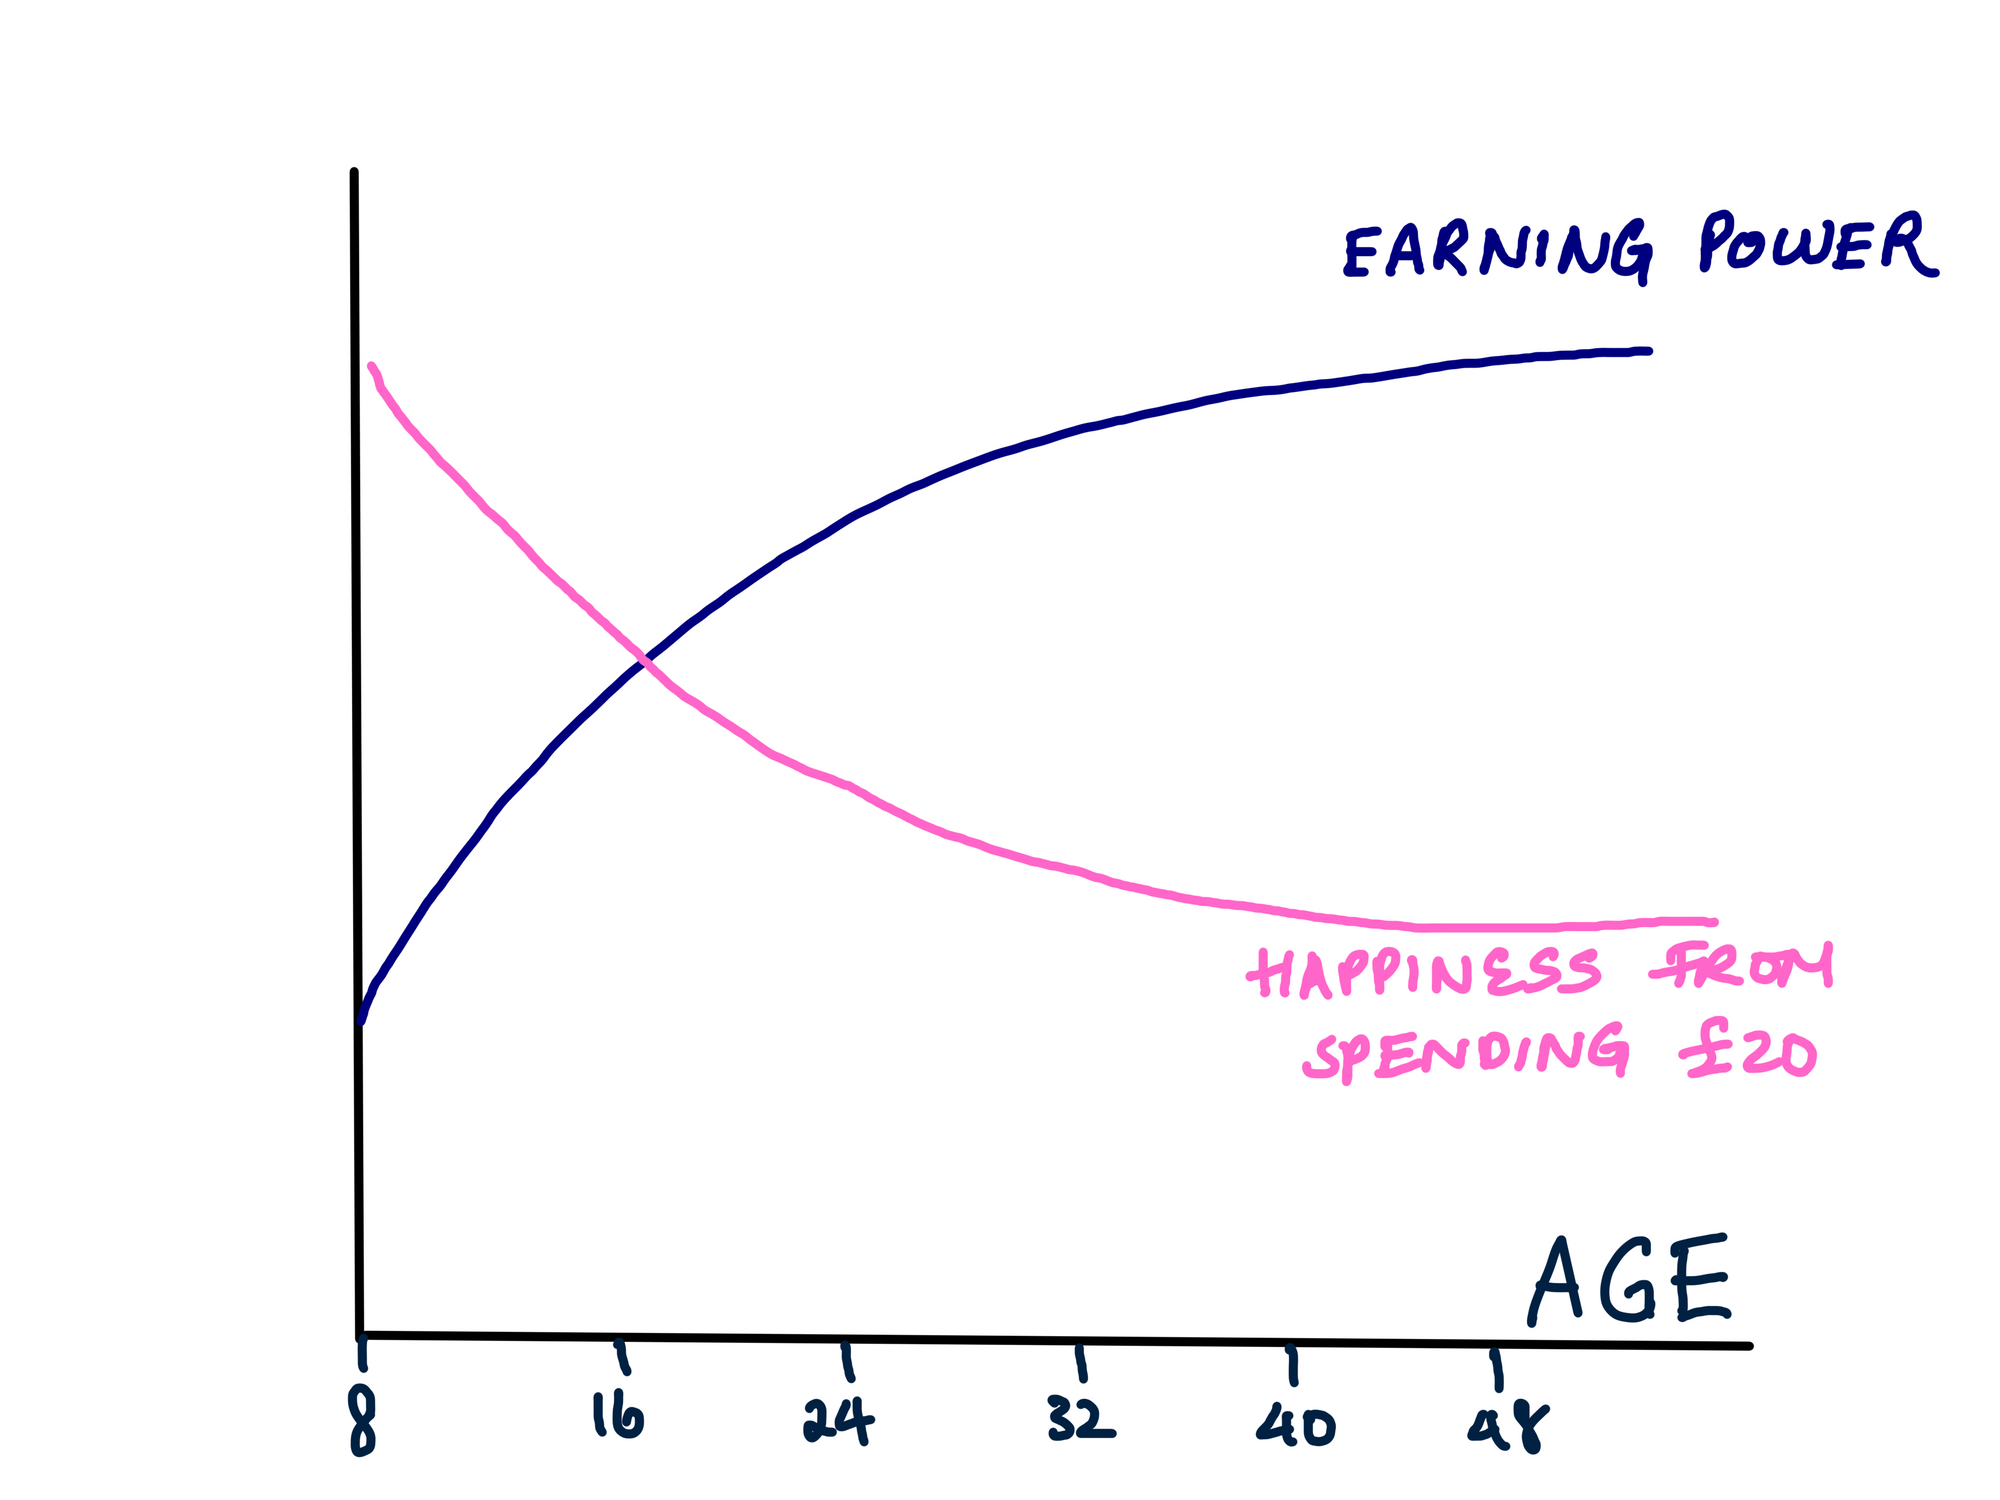 Earning power and happiness levels graph